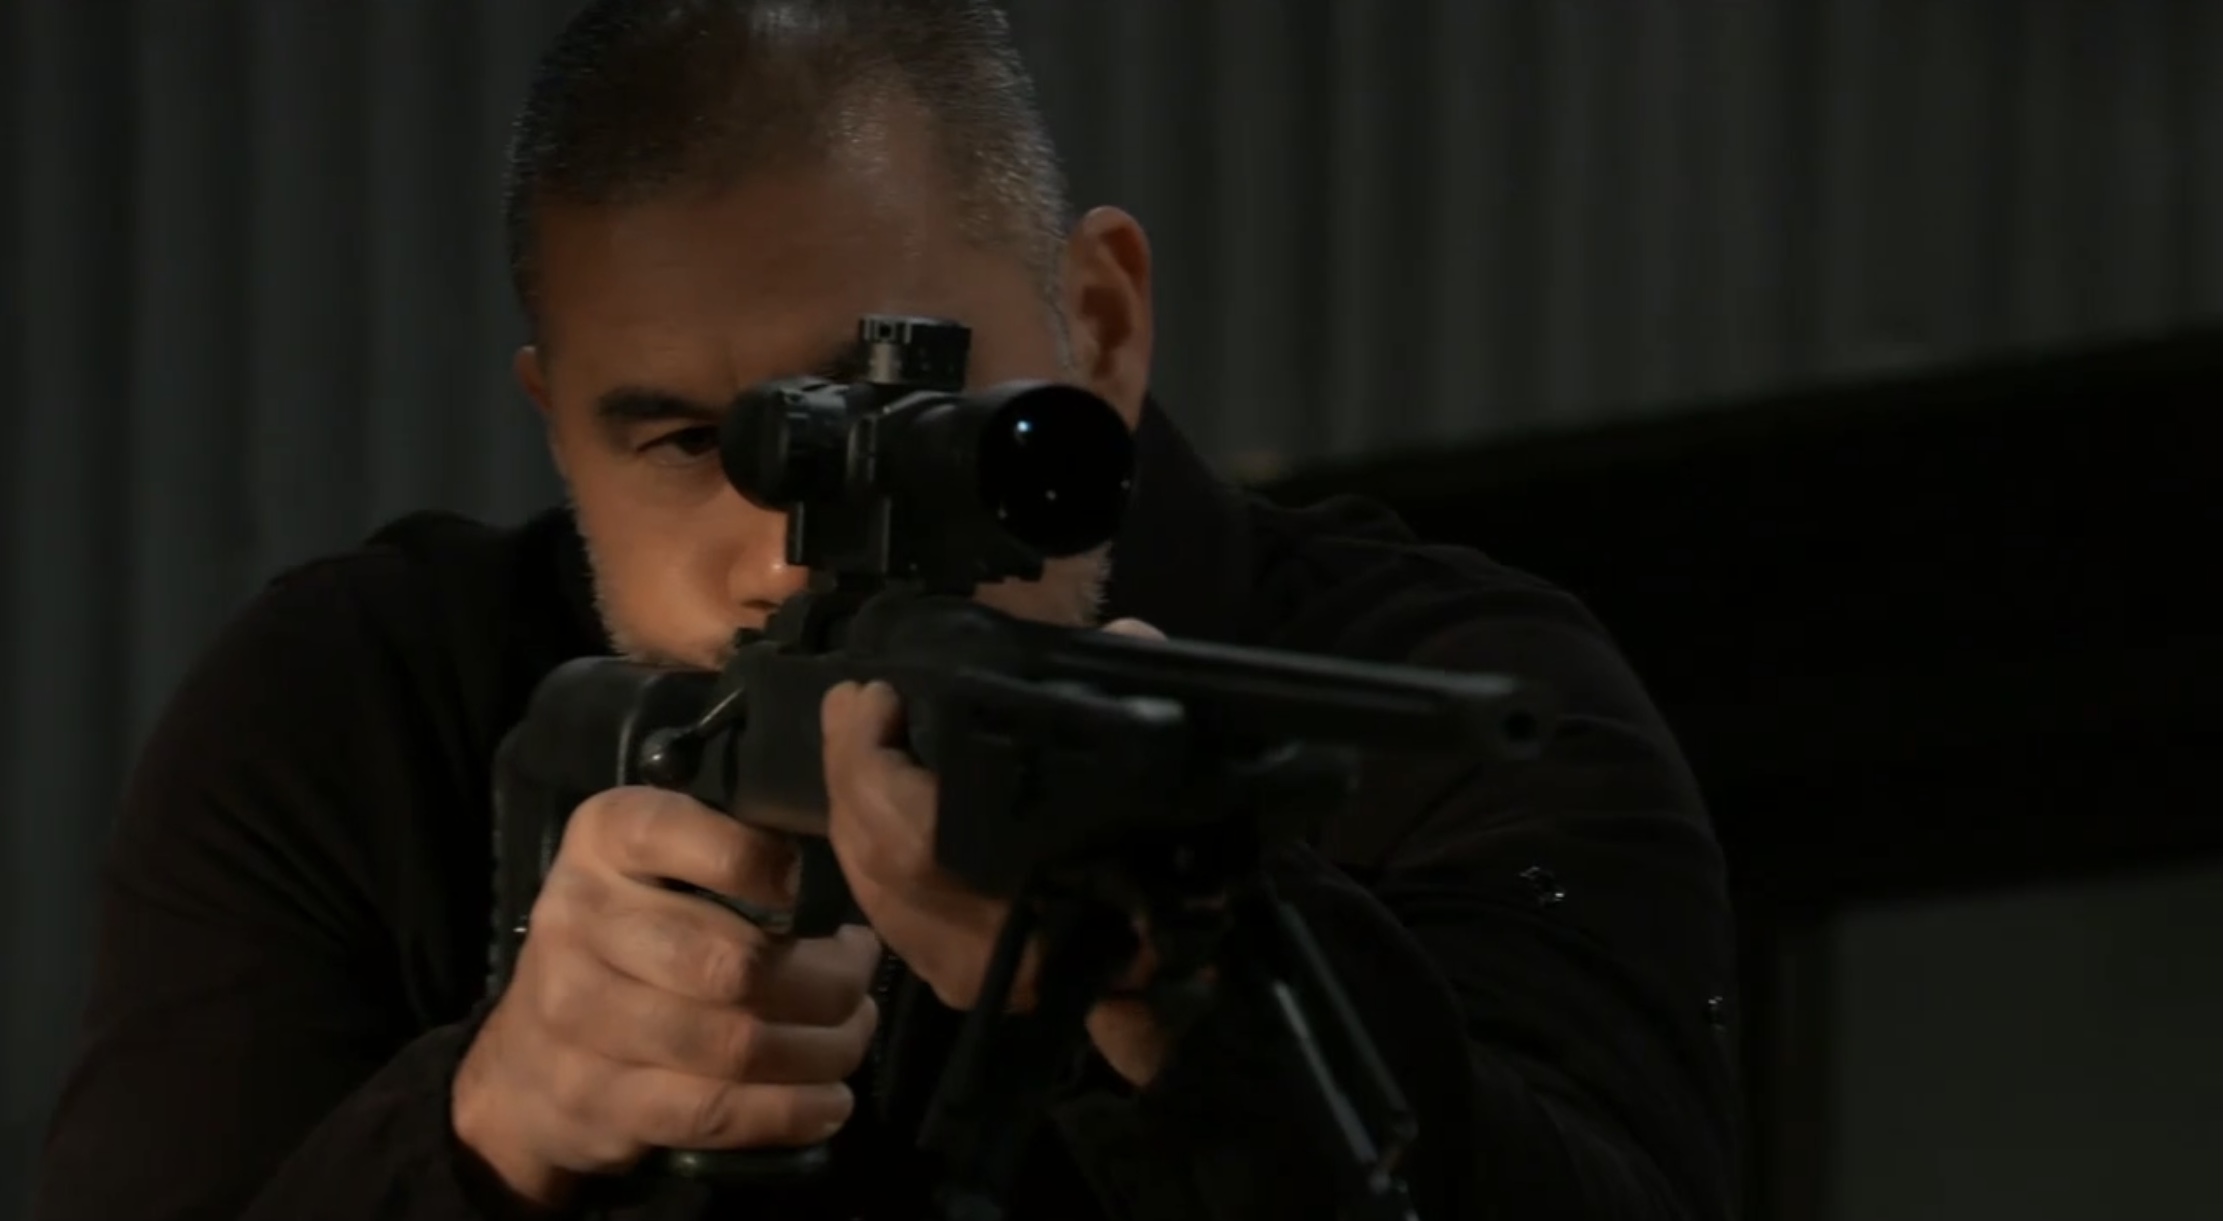 GH/A shooter aims at Sonny and tries to kill him